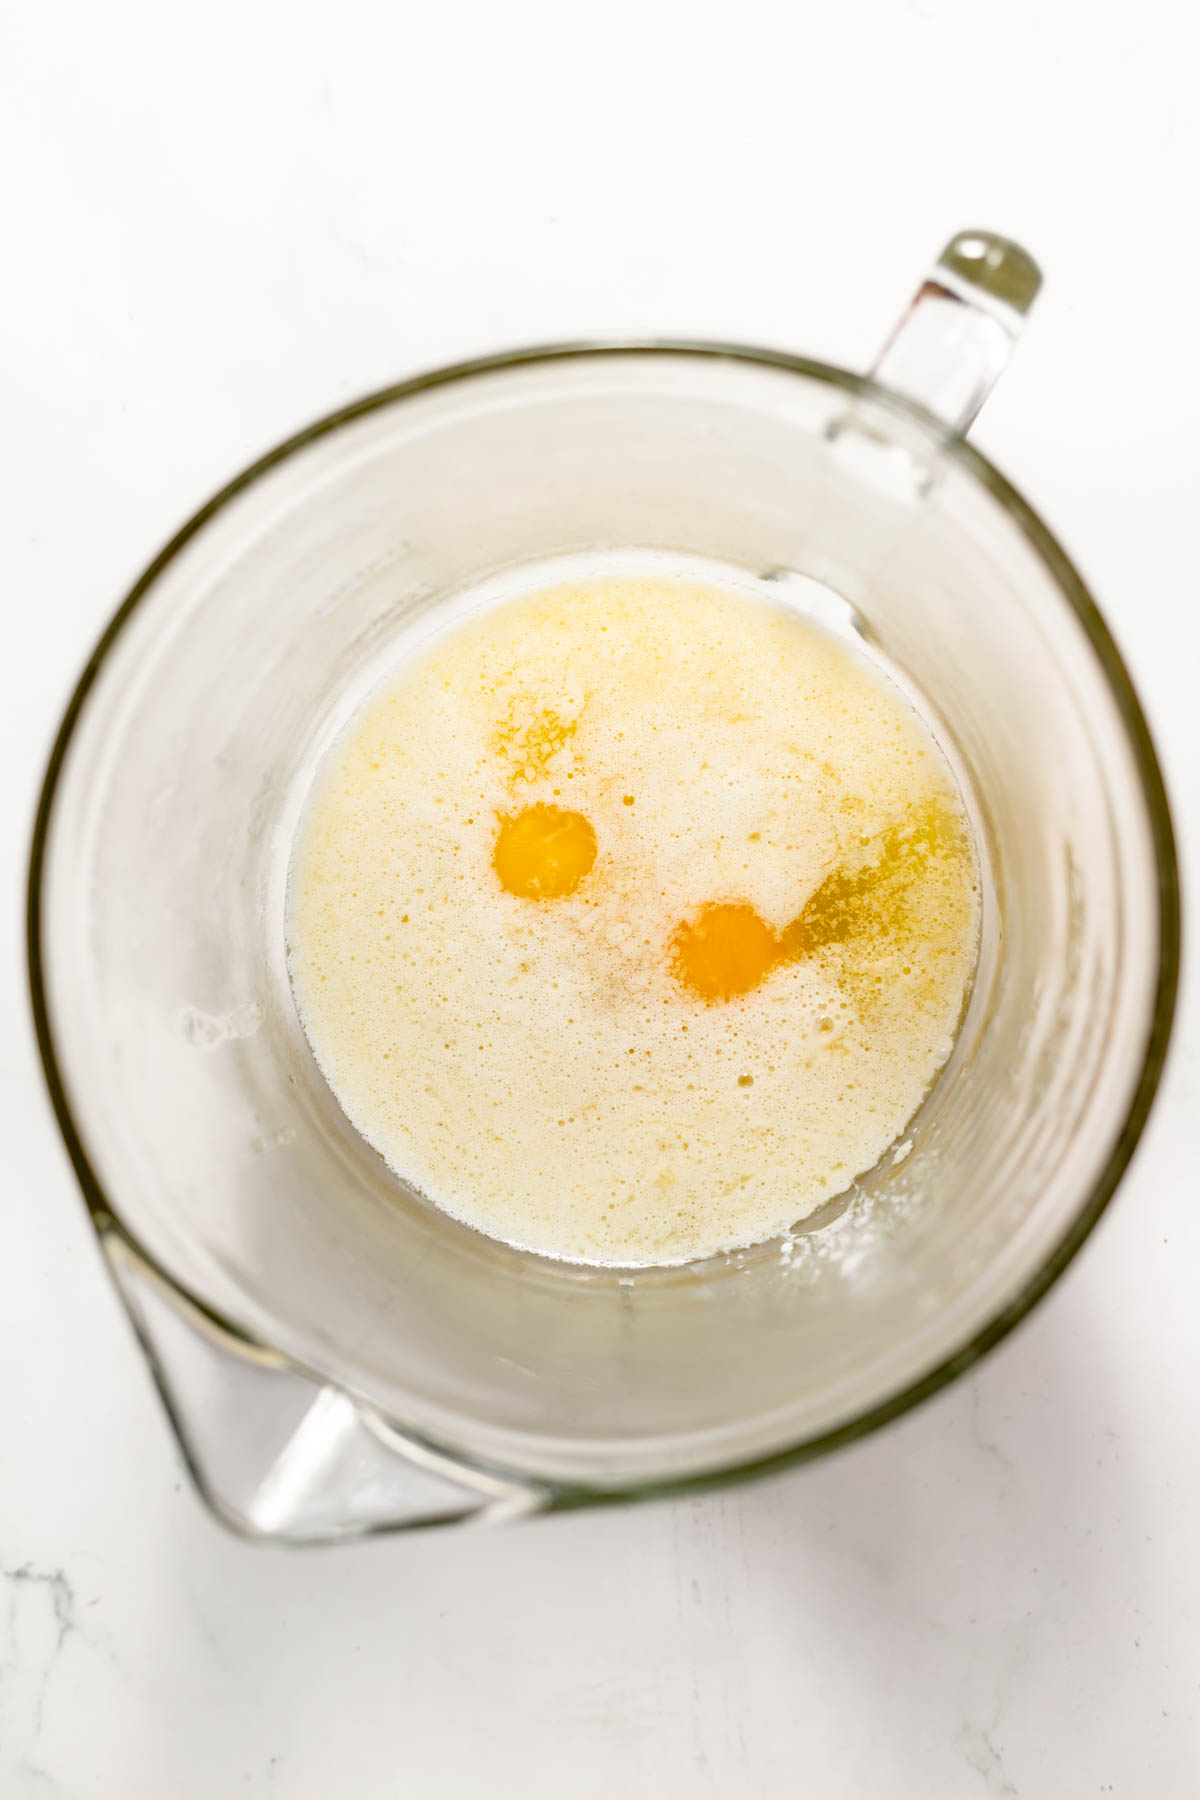 Eggs, milk, and melted butter in a glass mixing bowl.